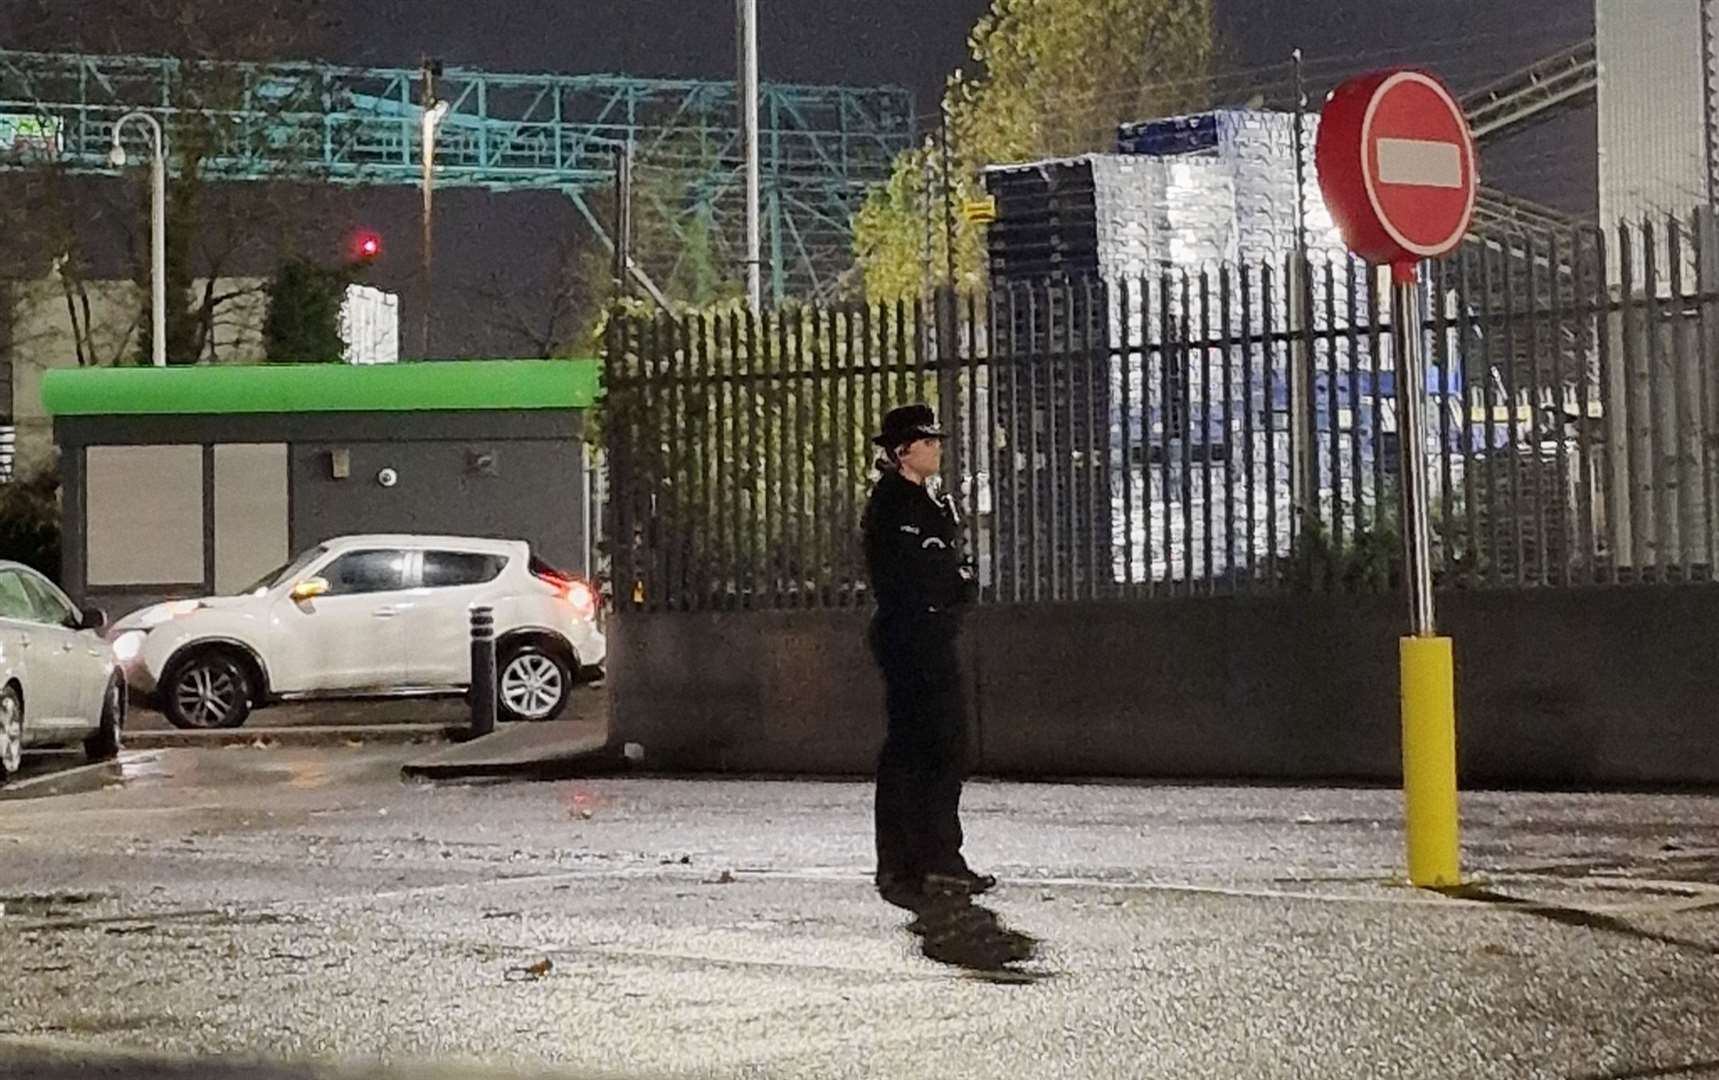 Police were at Asda in Greenhithe following the incident on Thursday last week